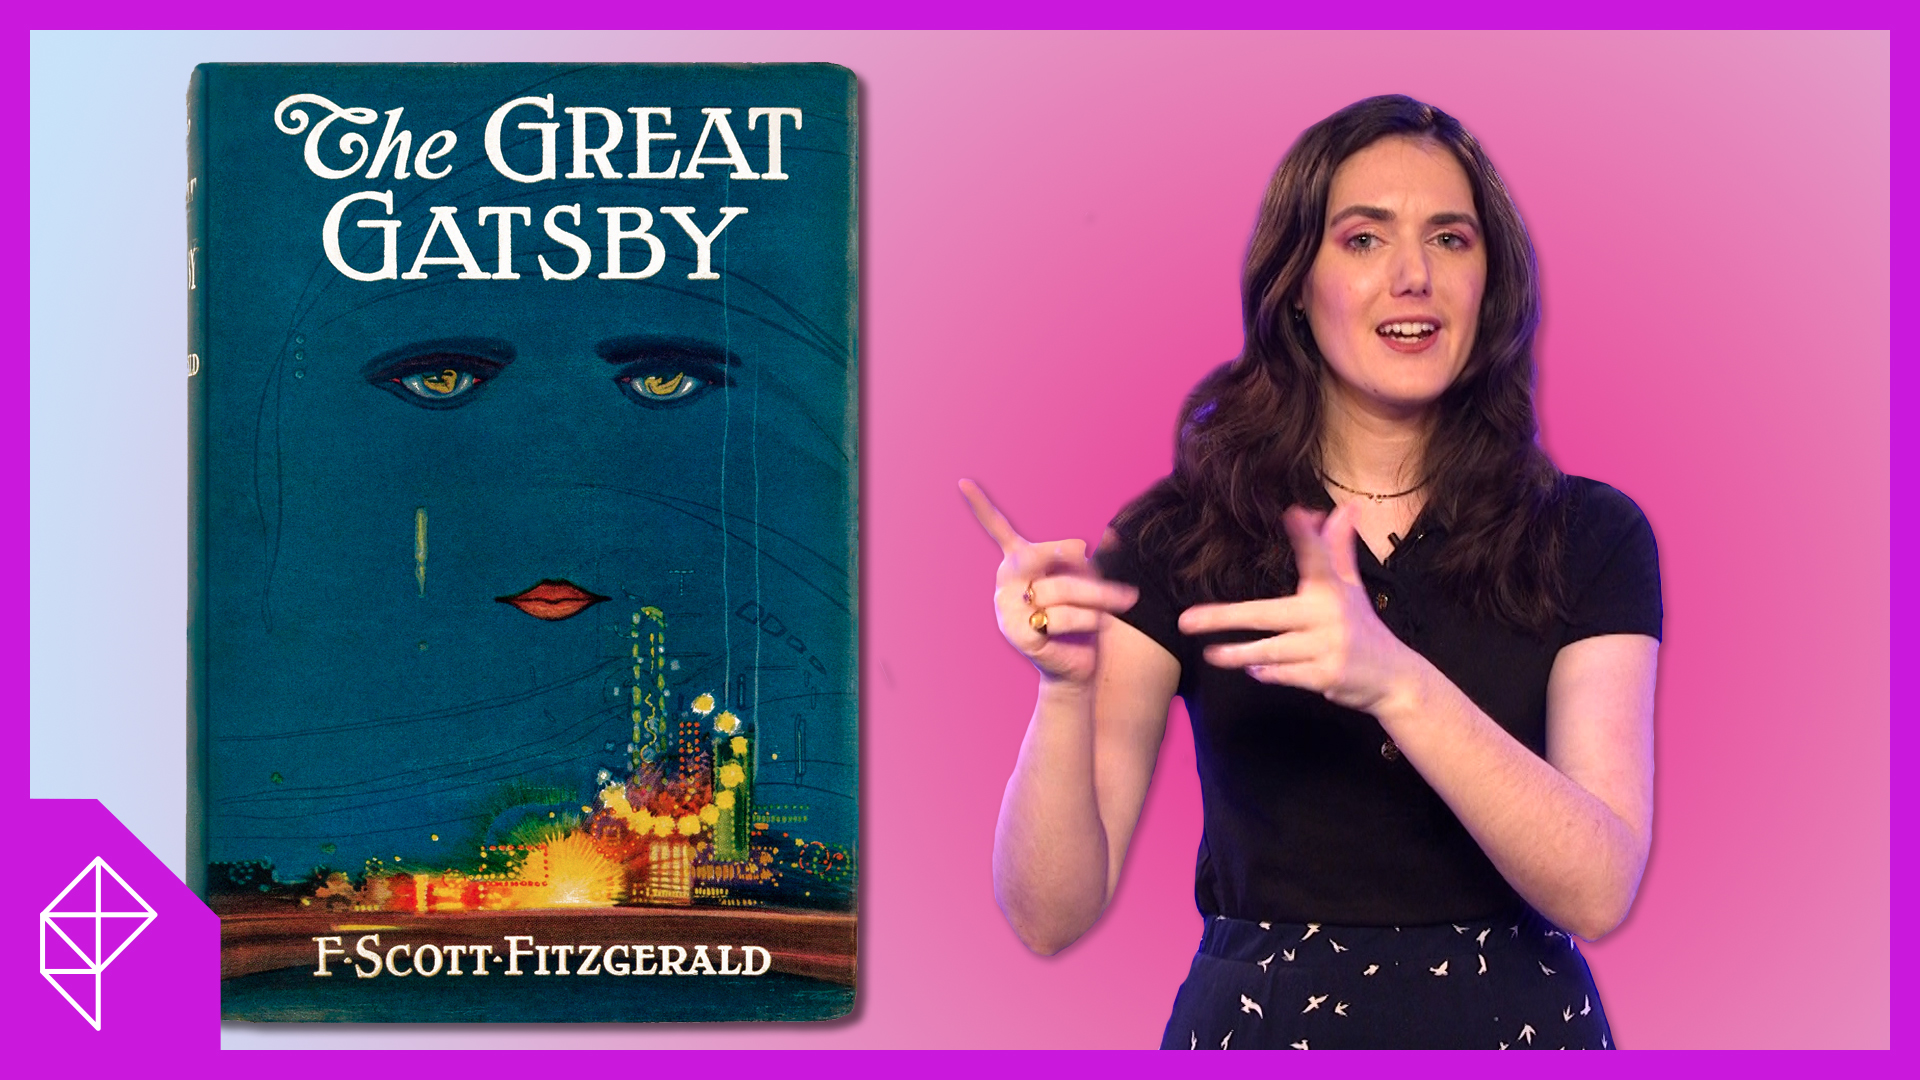 Simone de Rochefort, a brunette white woman in a black t-shirt, points at the original 1925 cover of The Great Gatsby.